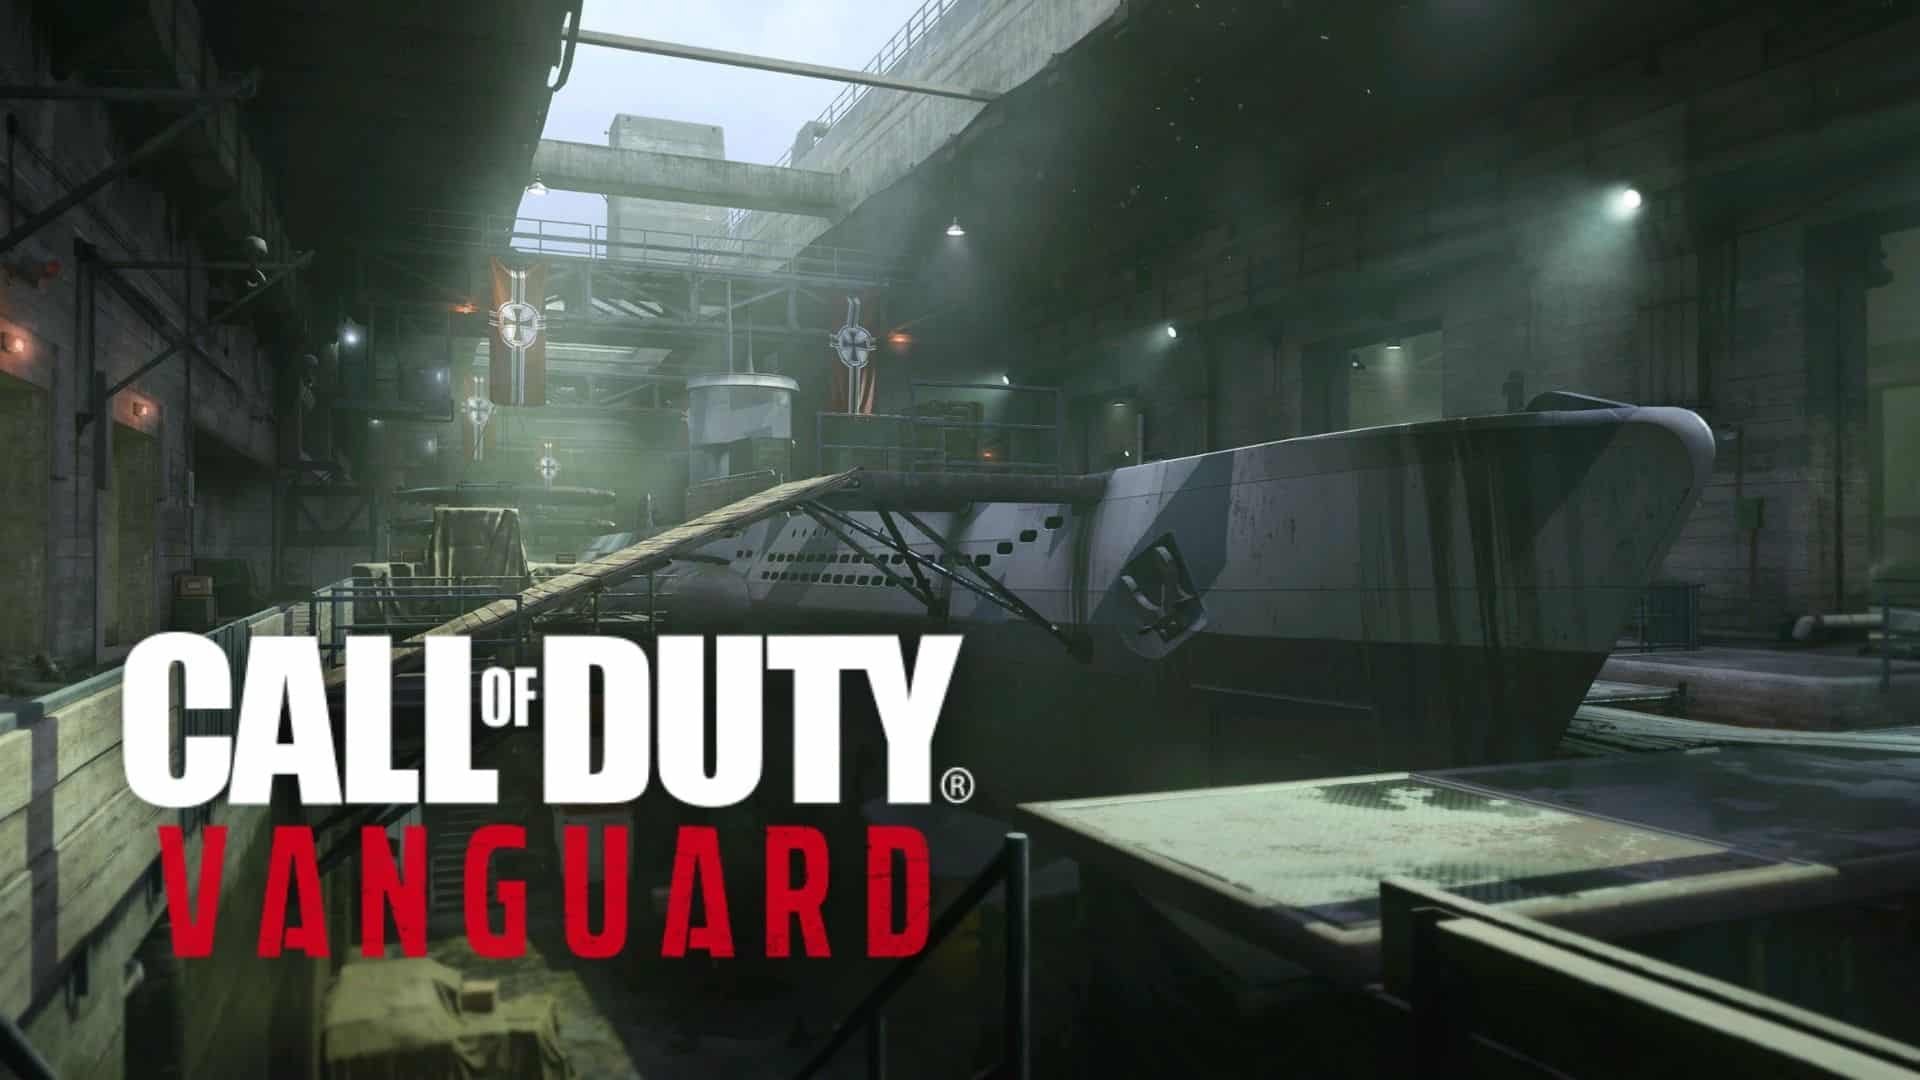 Wanted to hear people's opinions on CoD Vanguard maps that are out